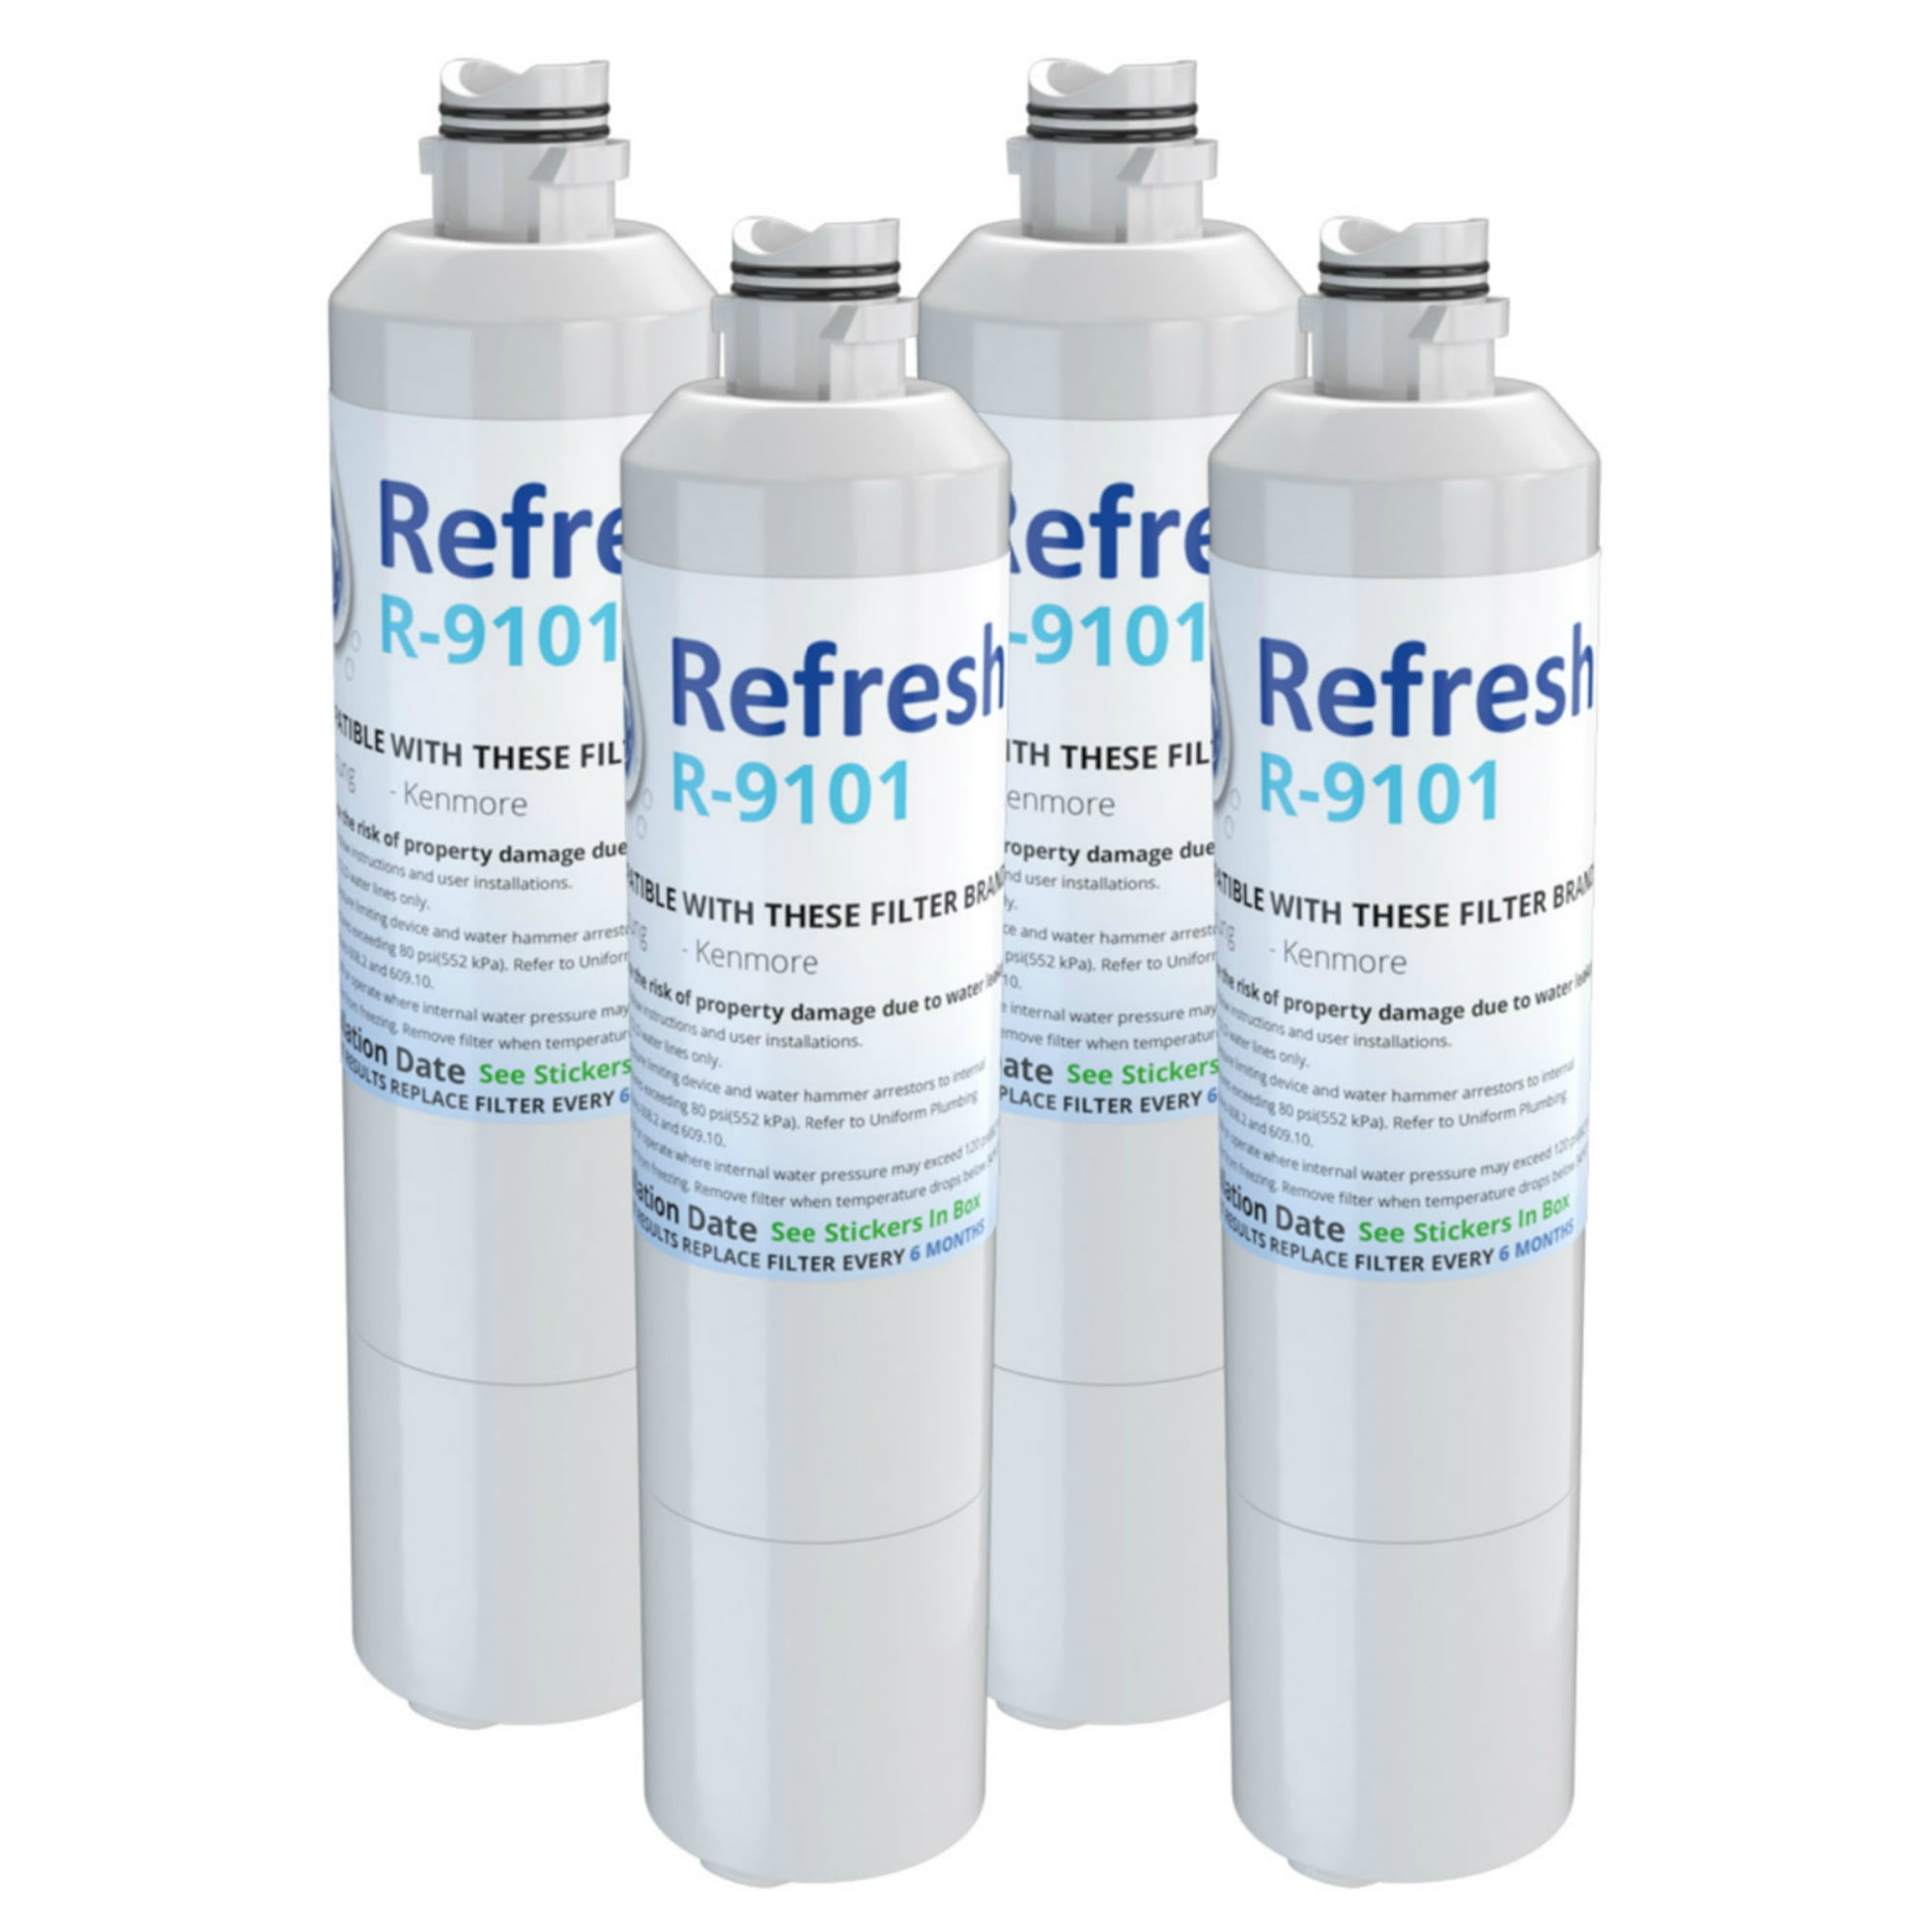 by Refresh Replacement For Samsung RS25H5111SR Refrigerator Water Filter 